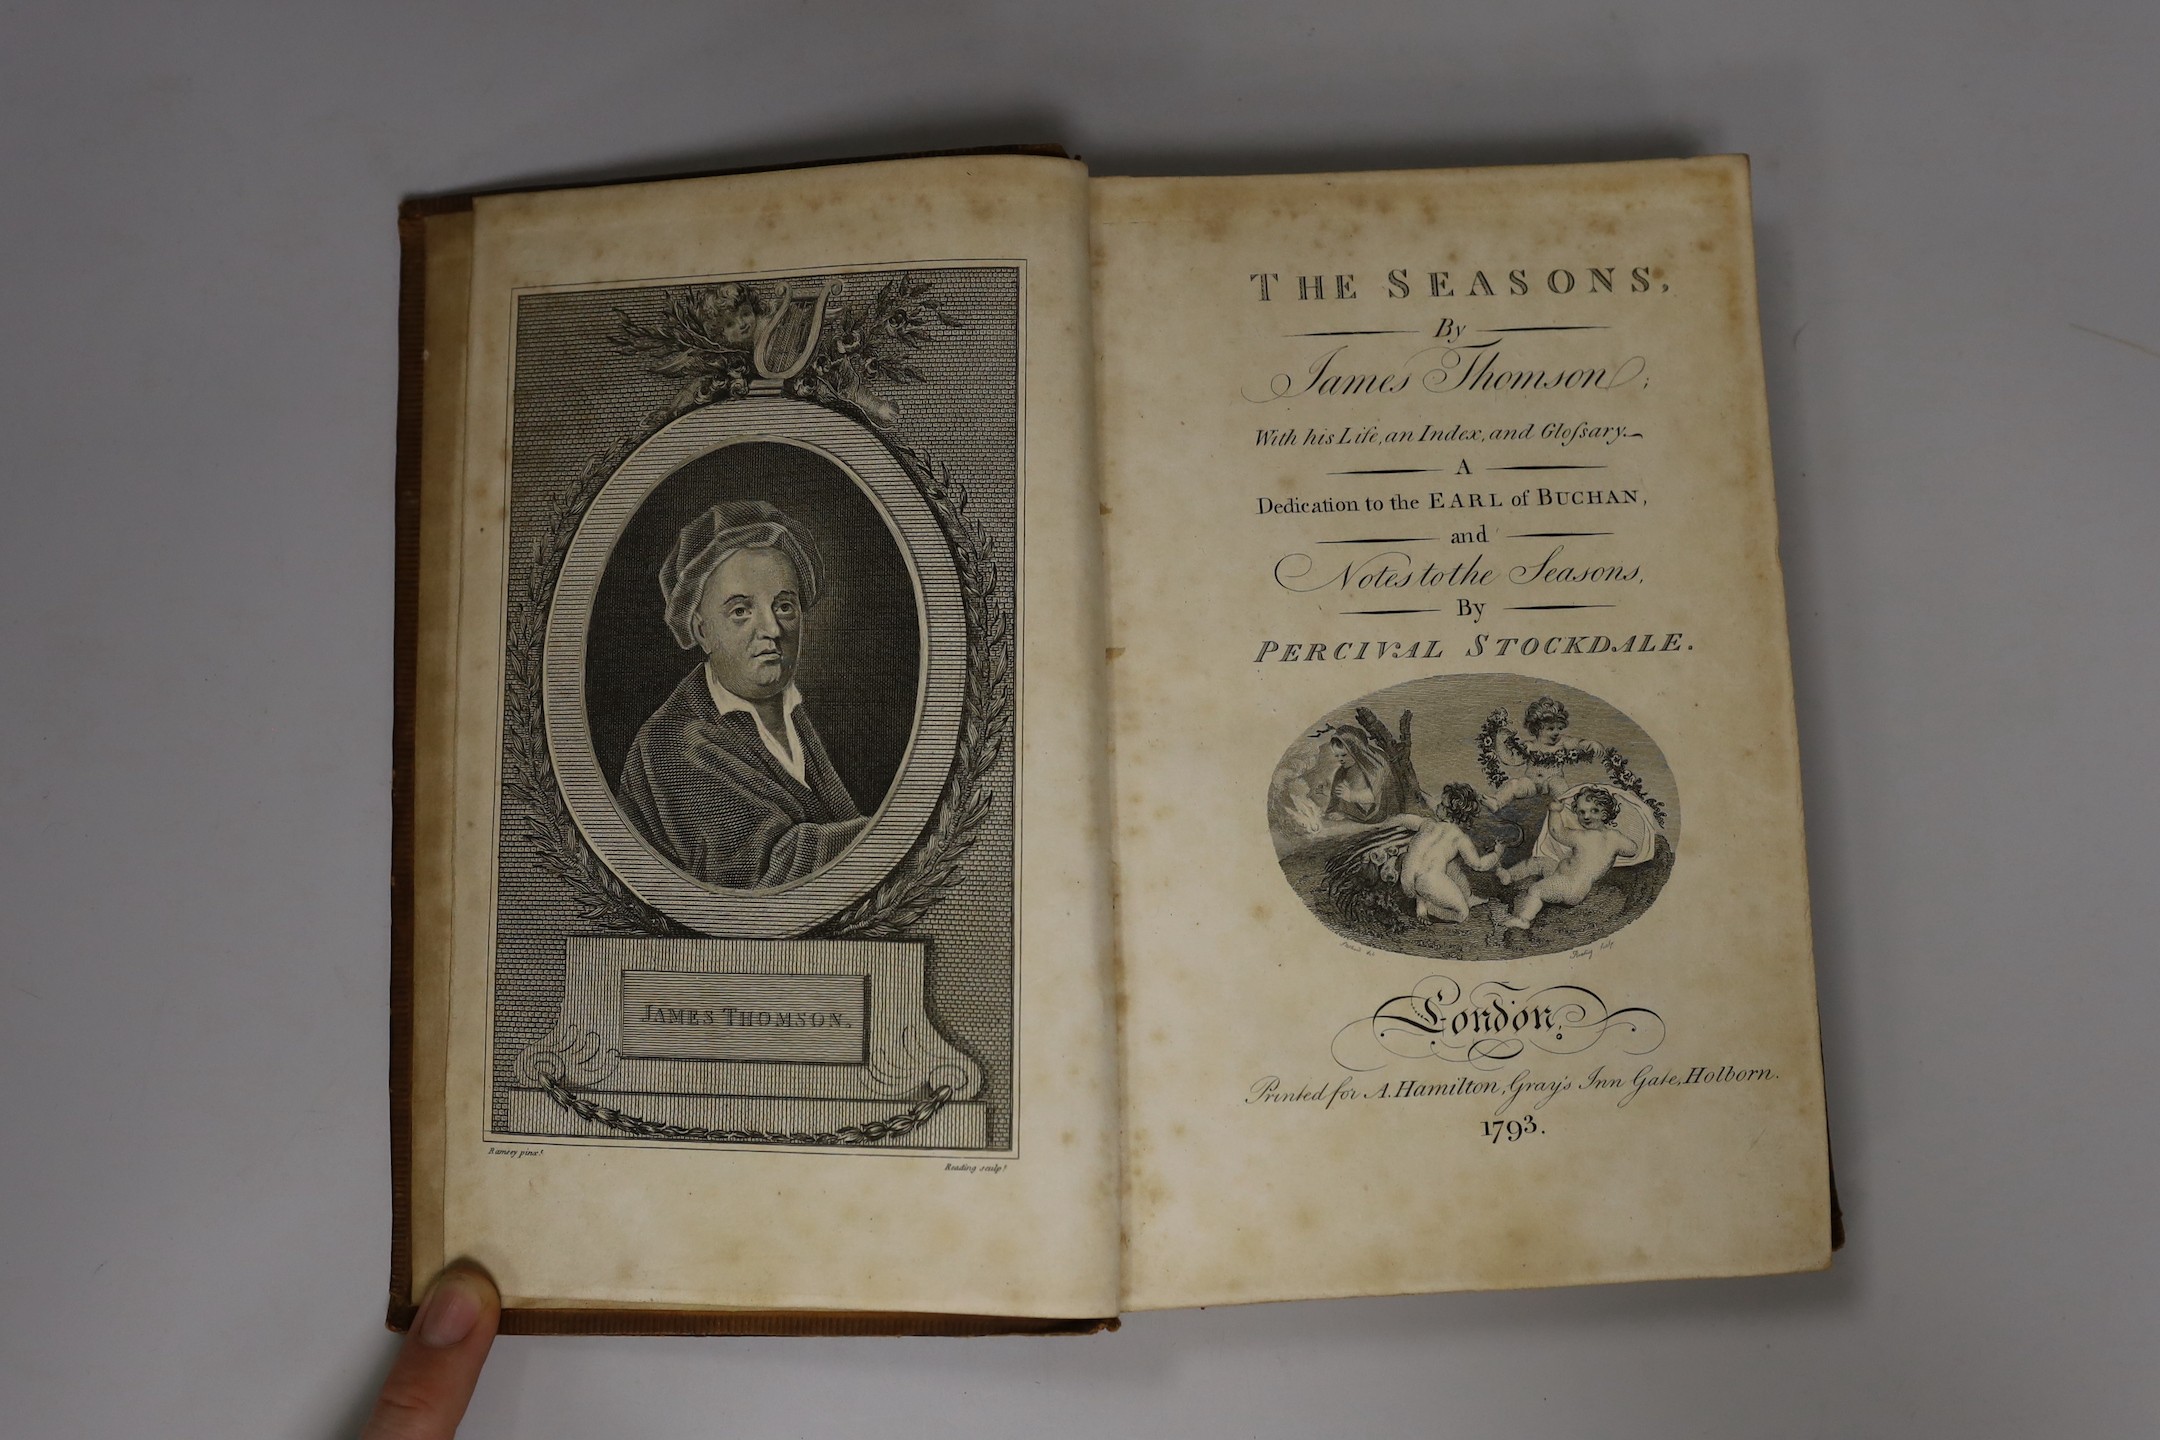 Thomson, James - The Seasons, edited by Percivil Stockdale, qto, calf, with portrait frontispiece, engraved title and 4 plates, browned and spotted throughout, A. Hamilton, London, 1793